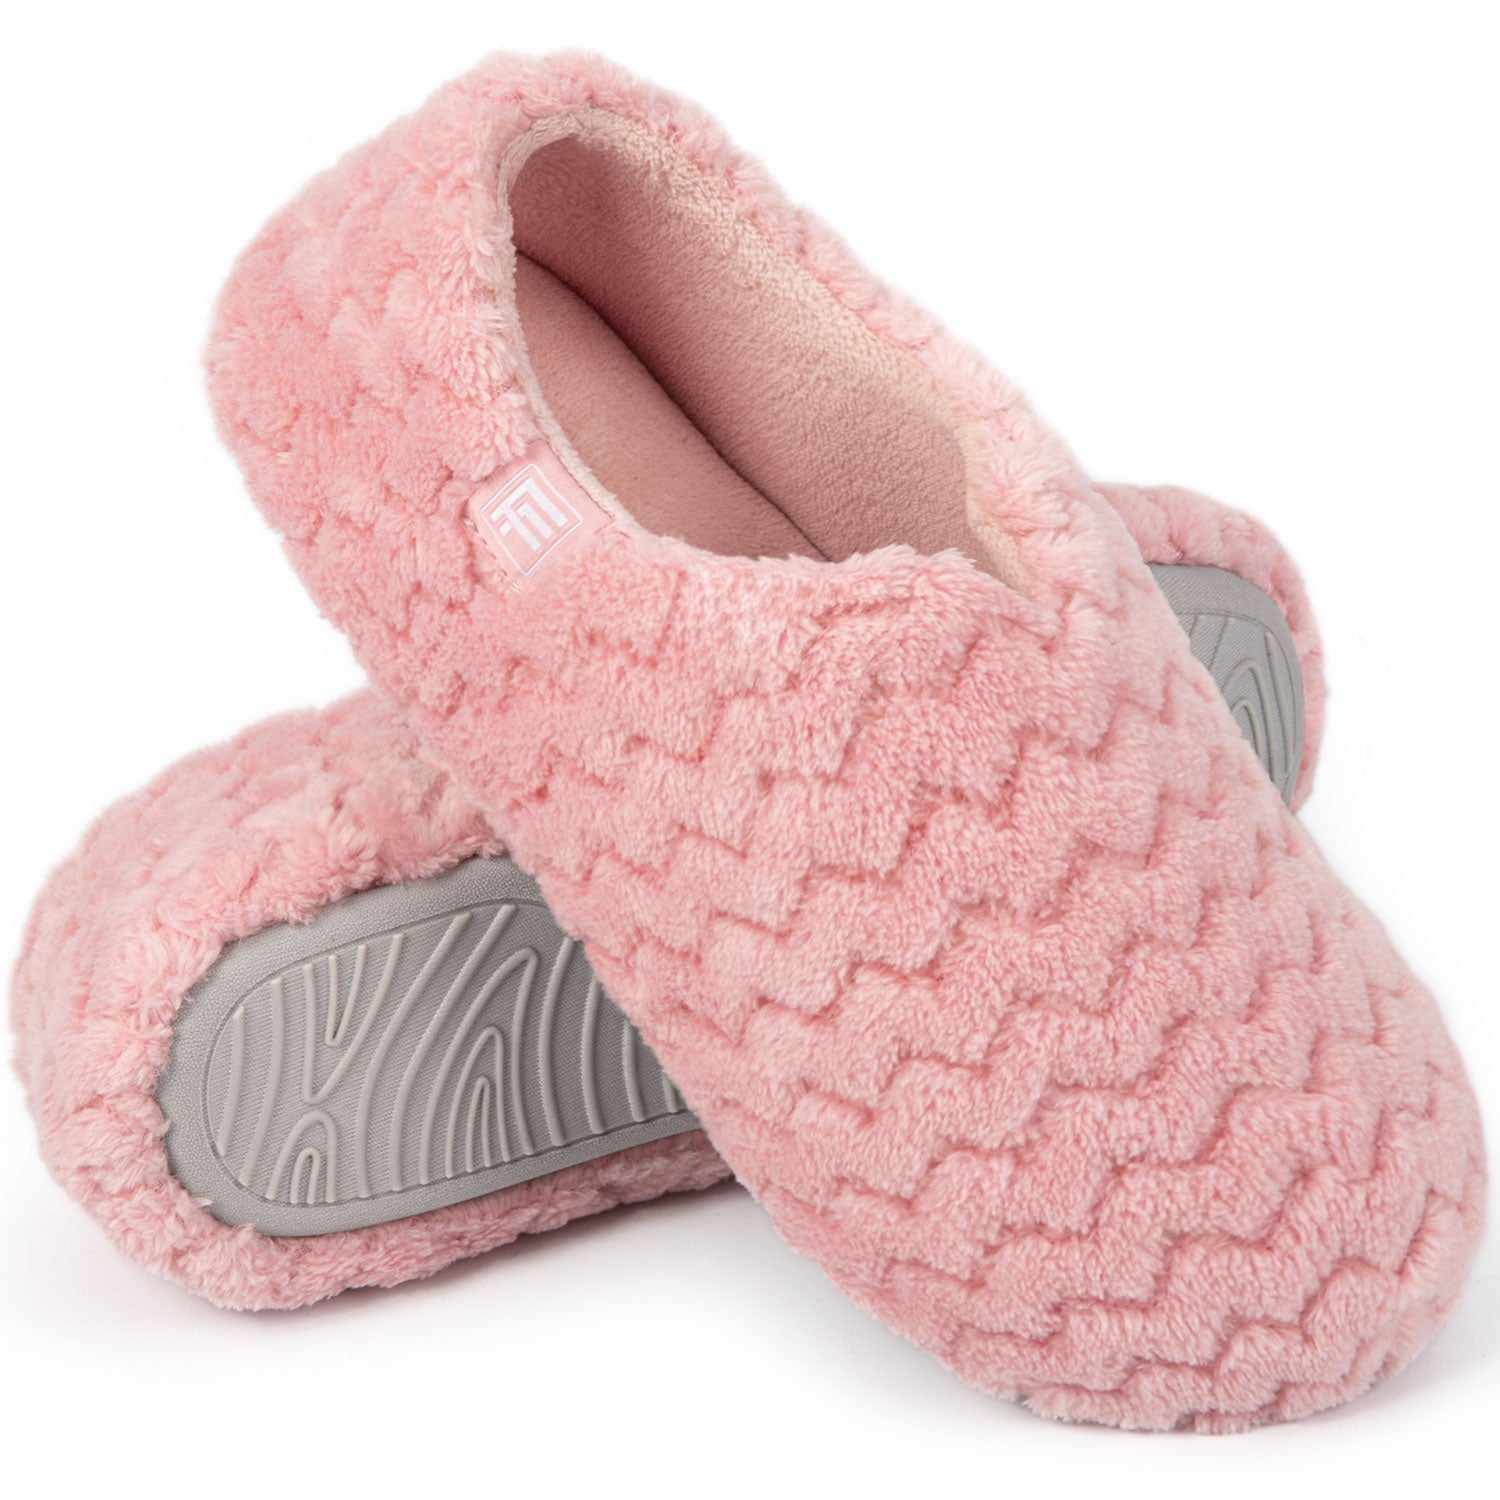 Womens Soft Memory Foam Slippers, Cotton Knit Winter House Slippers Bedroom  Slippers Indoor/Outdoor Shoes Slip-on Ballerina Slippers Non-slip Sole -  Walmart.com